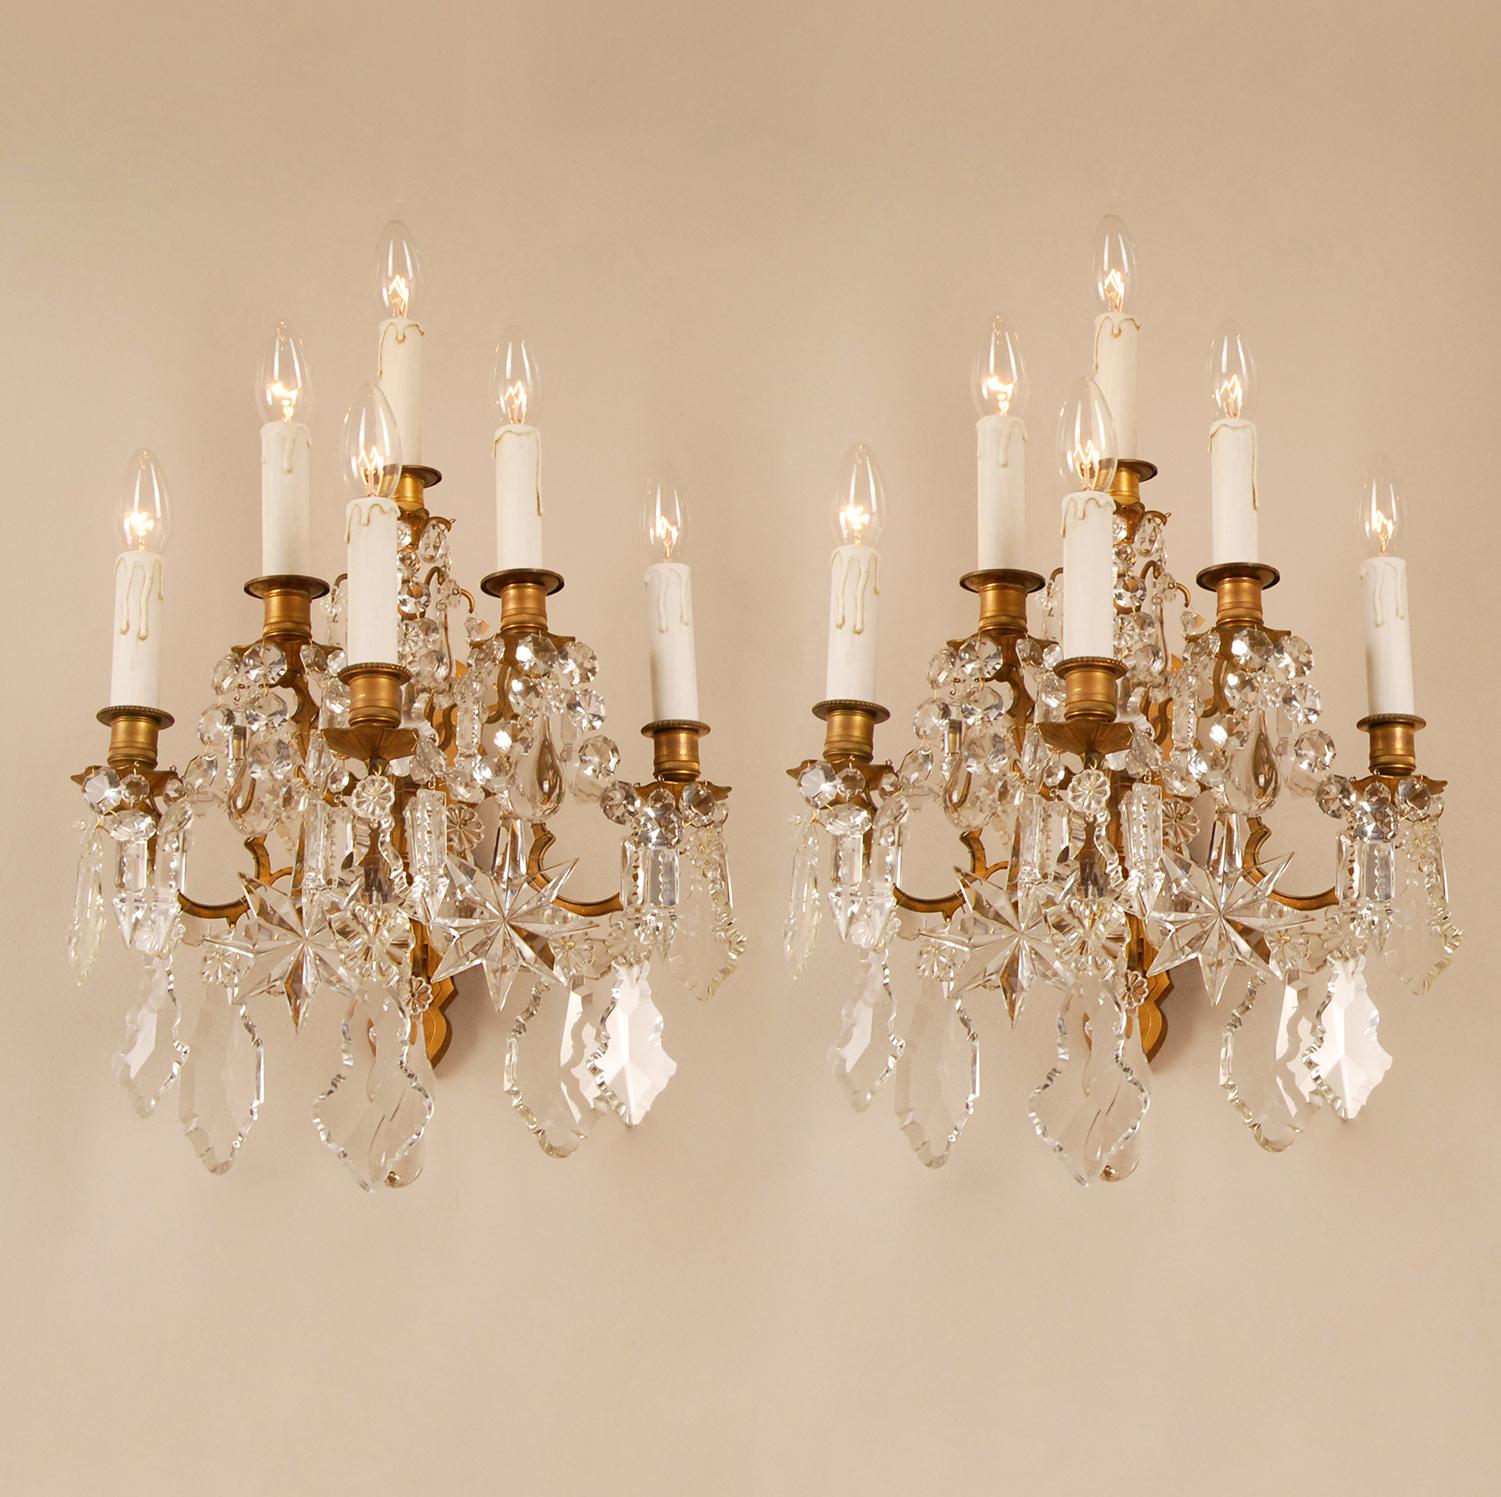 Baccarat Crystal 6 Light Wall Sconces 19th Century Gilt Bronze Antique - a Pair 3